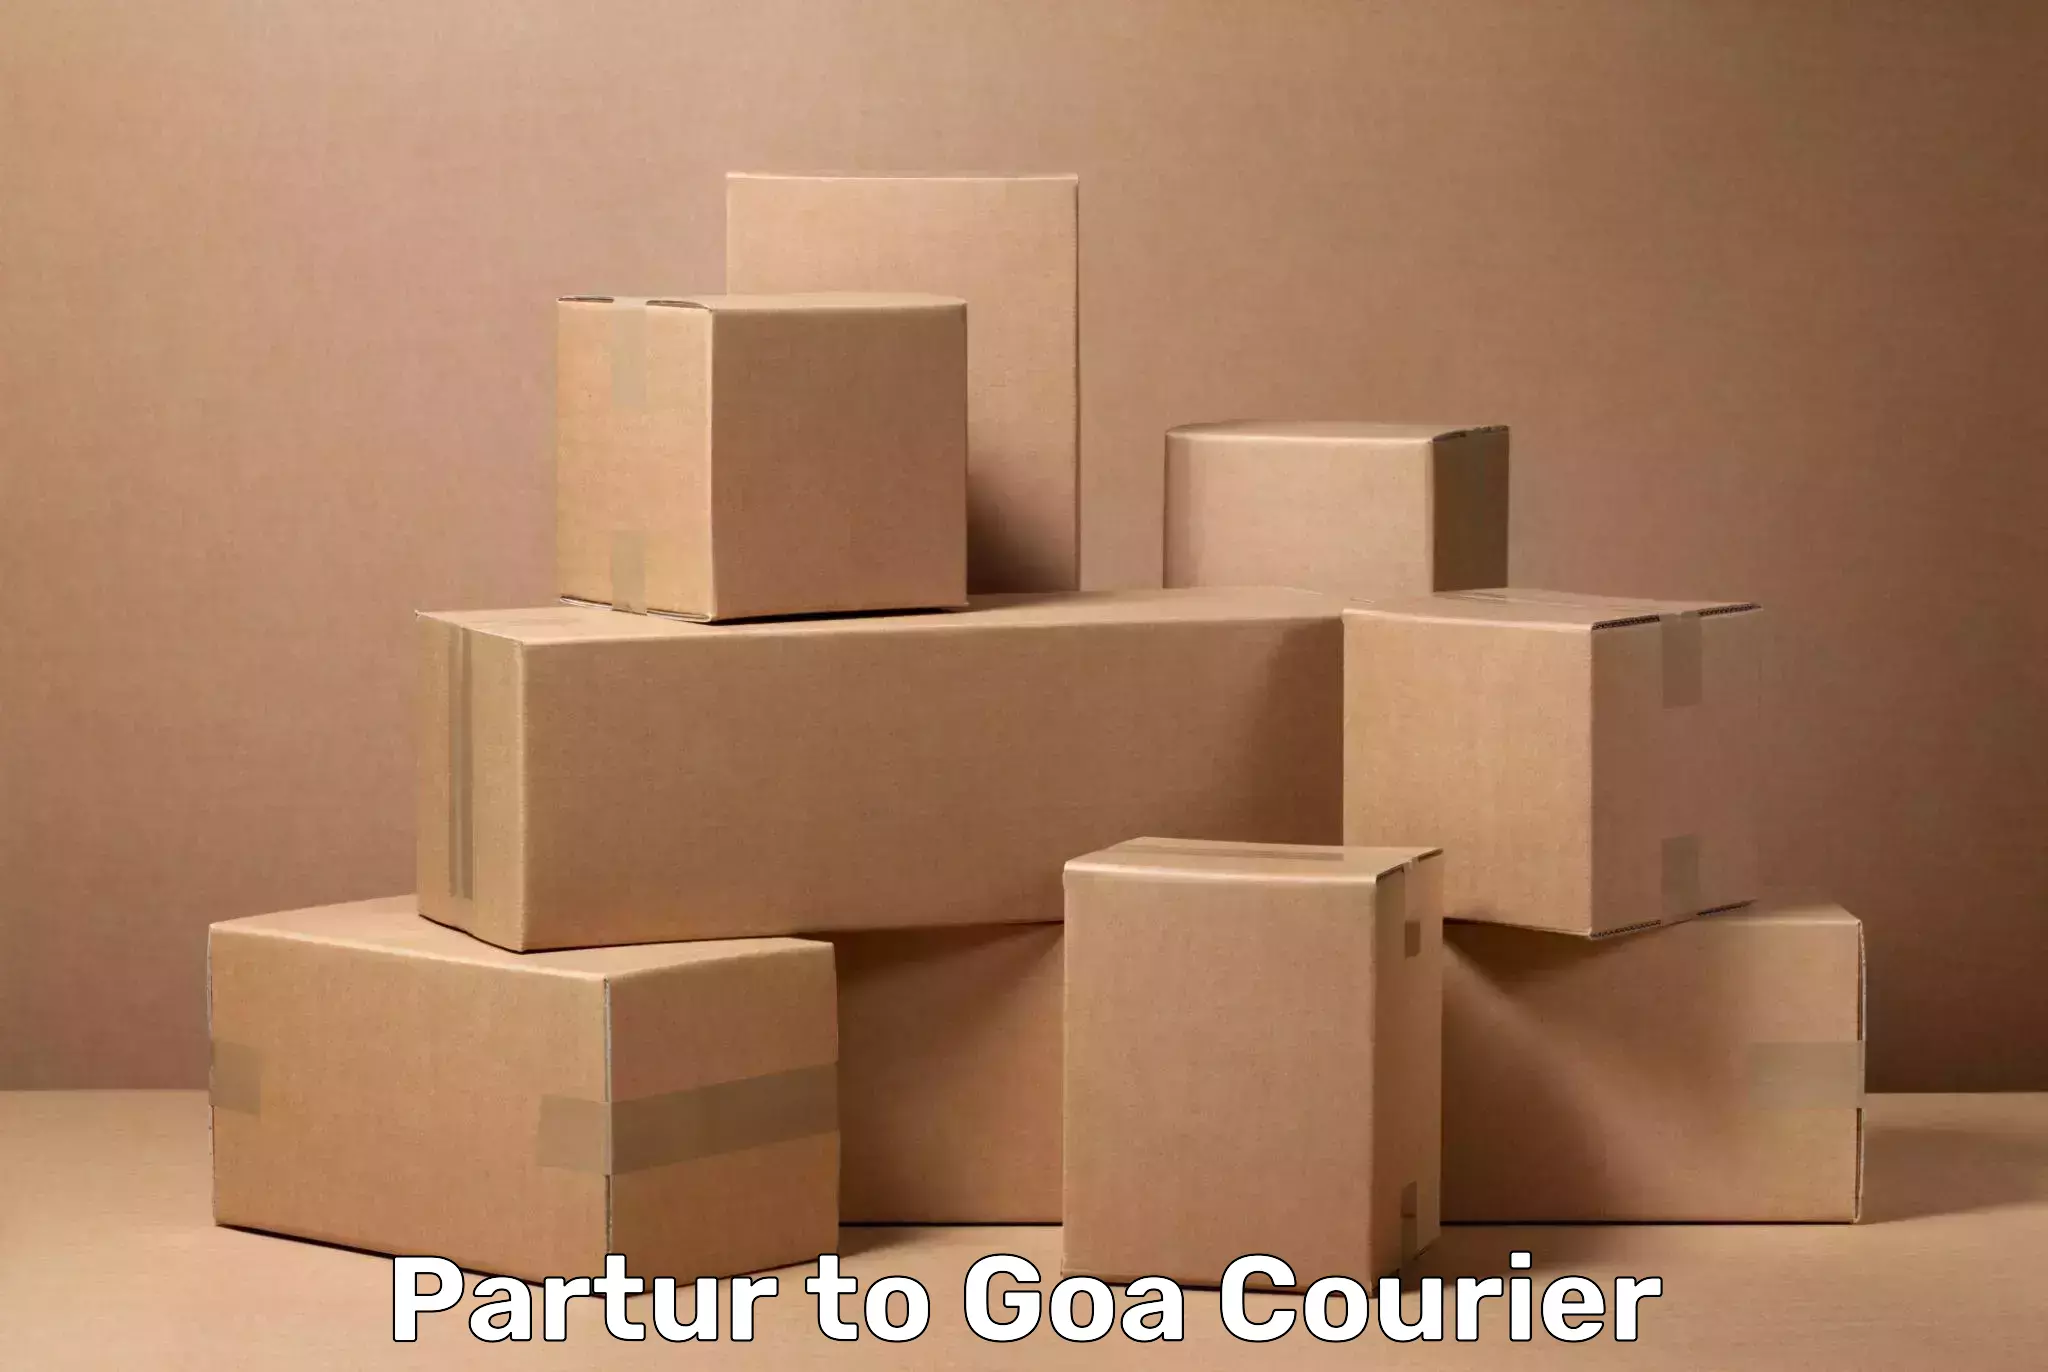 Luggage transport operations Partur to Goa